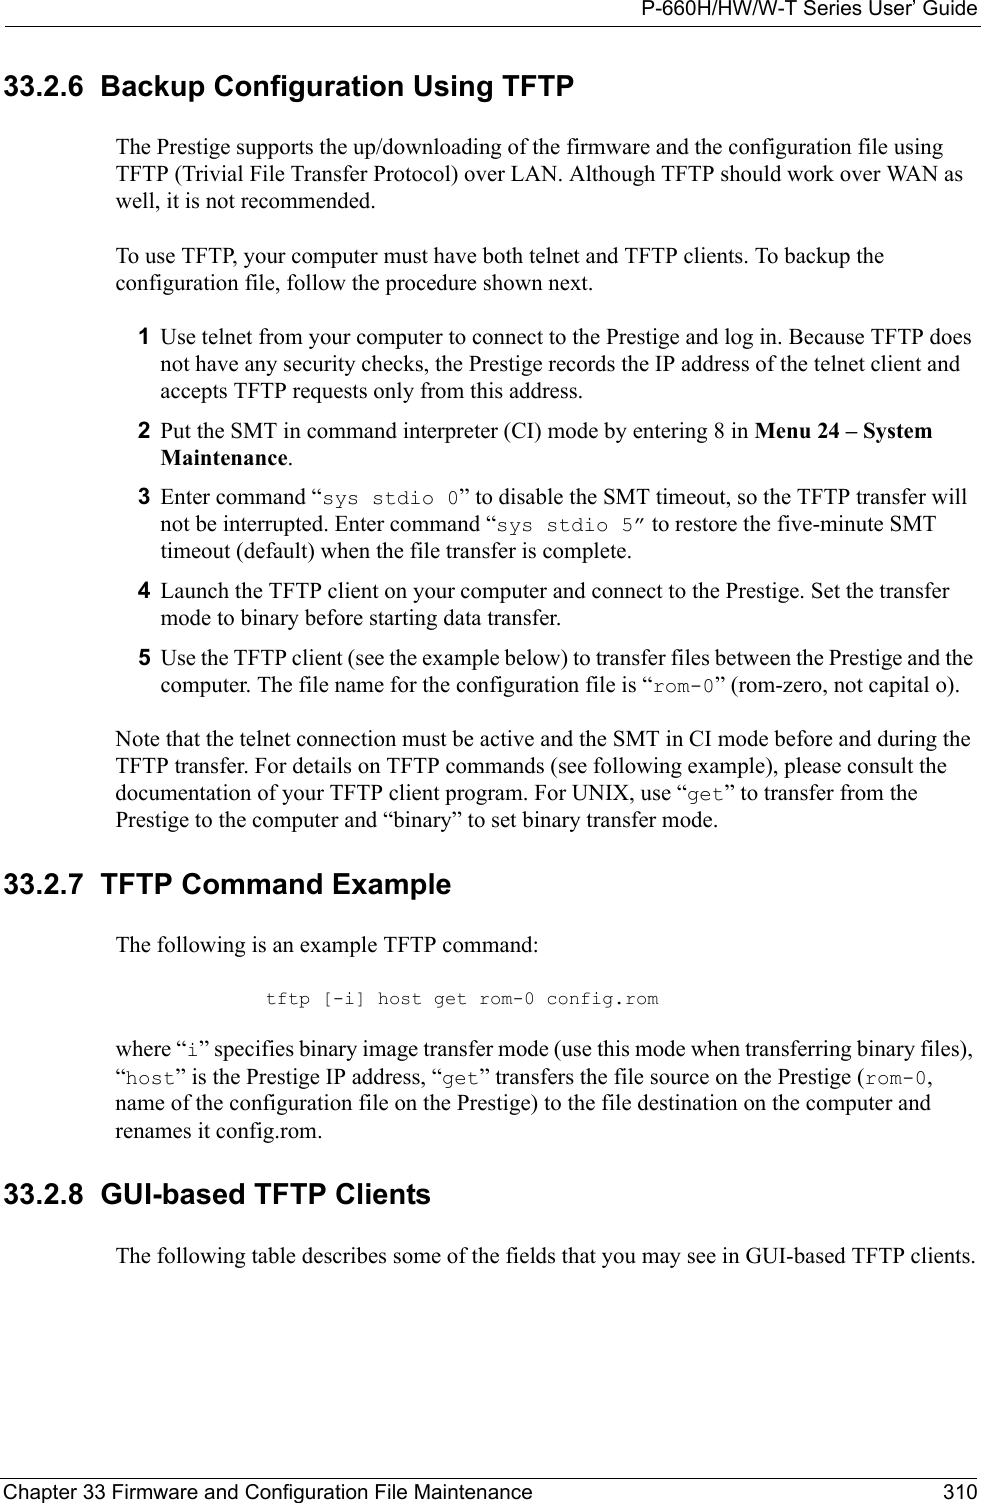 P-660H/HW/W-T Series User’ GuideChapter 33 Firmware and Configuration File Maintenance 31033.2.6  Backup Configuration Using TFTPThe Prestige supports the up/downloading of the firmware and the configuration file using TFTP (Trivial File Transfer Protocol) over LAN. Although TFTP should work over WAN as well, it is not recommended.To use TFTP, your computer must have both telnet and TFTP clients. To backup the configuration file, follow the procedure shown next.1Use telnet from your computer to connect to the Prestige and log in. Because TFTP does not have any security checks, the Prestige records the IP address of the telnet client and accepts TFTP requests only from this address.2Put the SMT in command interpreter (CI) mode by entering 8 in Menu 24 – System Maintenance.3Enter command “sys stdio 0” to disable the SMT timeout, so the TFTP transfer will not be interrupted. Enter command “sys stdio 5” to restore the five-minute SMT timeout (default) when the file transfer is complete.4Launch the TFTP client on your computer and connect to the Prestige. Set the transfer mode to binary before starting data transfer.5Use the TFTP client (see the example below) to transfer files between the Prestige and the computer. The file name for the configuration file is “rom-0” (rom-zero, not capital o).Note that the telnet connection must be active and the SMT in CI mode before and during the TFTP transfer. For details on TFTP commands (see following example), please consult the documentation of your TFTP client program. For UNIX, use “get” to transfer from the Prestige to the computer and “binary” to set binary transfer mode.33.2.7  TFTP Command ExampleThe following is an example TFTP command:tftp [-i] host get rom-0 config.romwhere “i” specifies binary image transfer mode (use this mode when transferring binary files), “host” is the Prestige IP address, “get” transfers the file source on the Prestige (rom-0, name of the configuration file on the Prestige) to the file destination on the computer and renames it config.rom.33.2.8  GUI-based TFTP ClientsThe following table describes some of the fields that you may see in GUI-based TFTP clients.